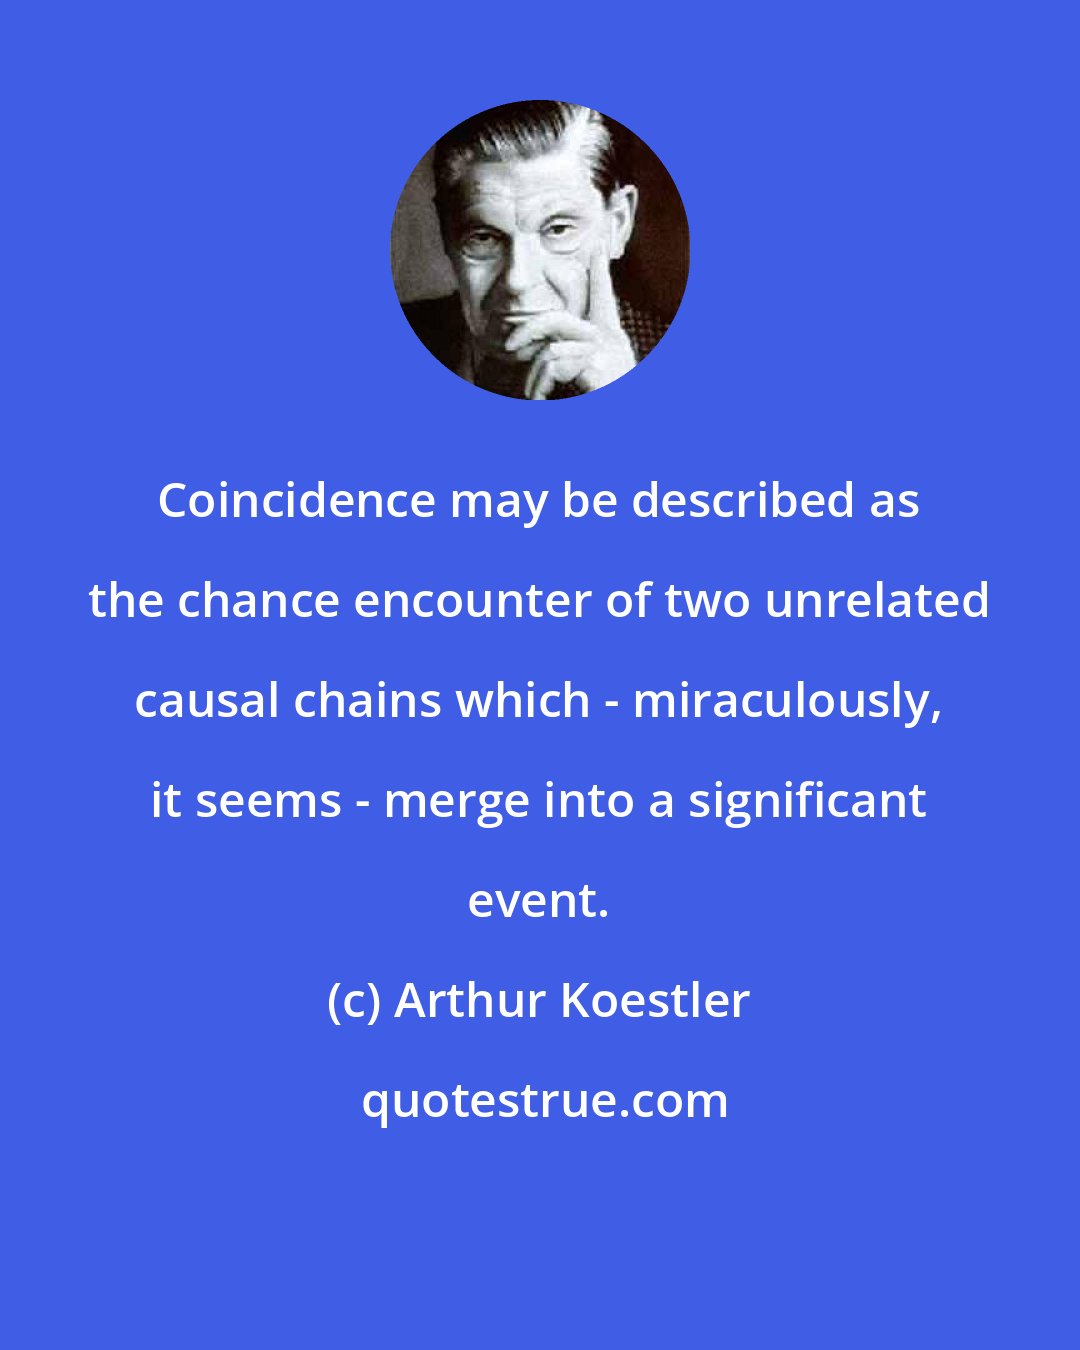 Arthur Koestler: Coincidence may be described as the chance encounter of two unrelated causal chains which - miraculously, it seems - merge into a significant event.